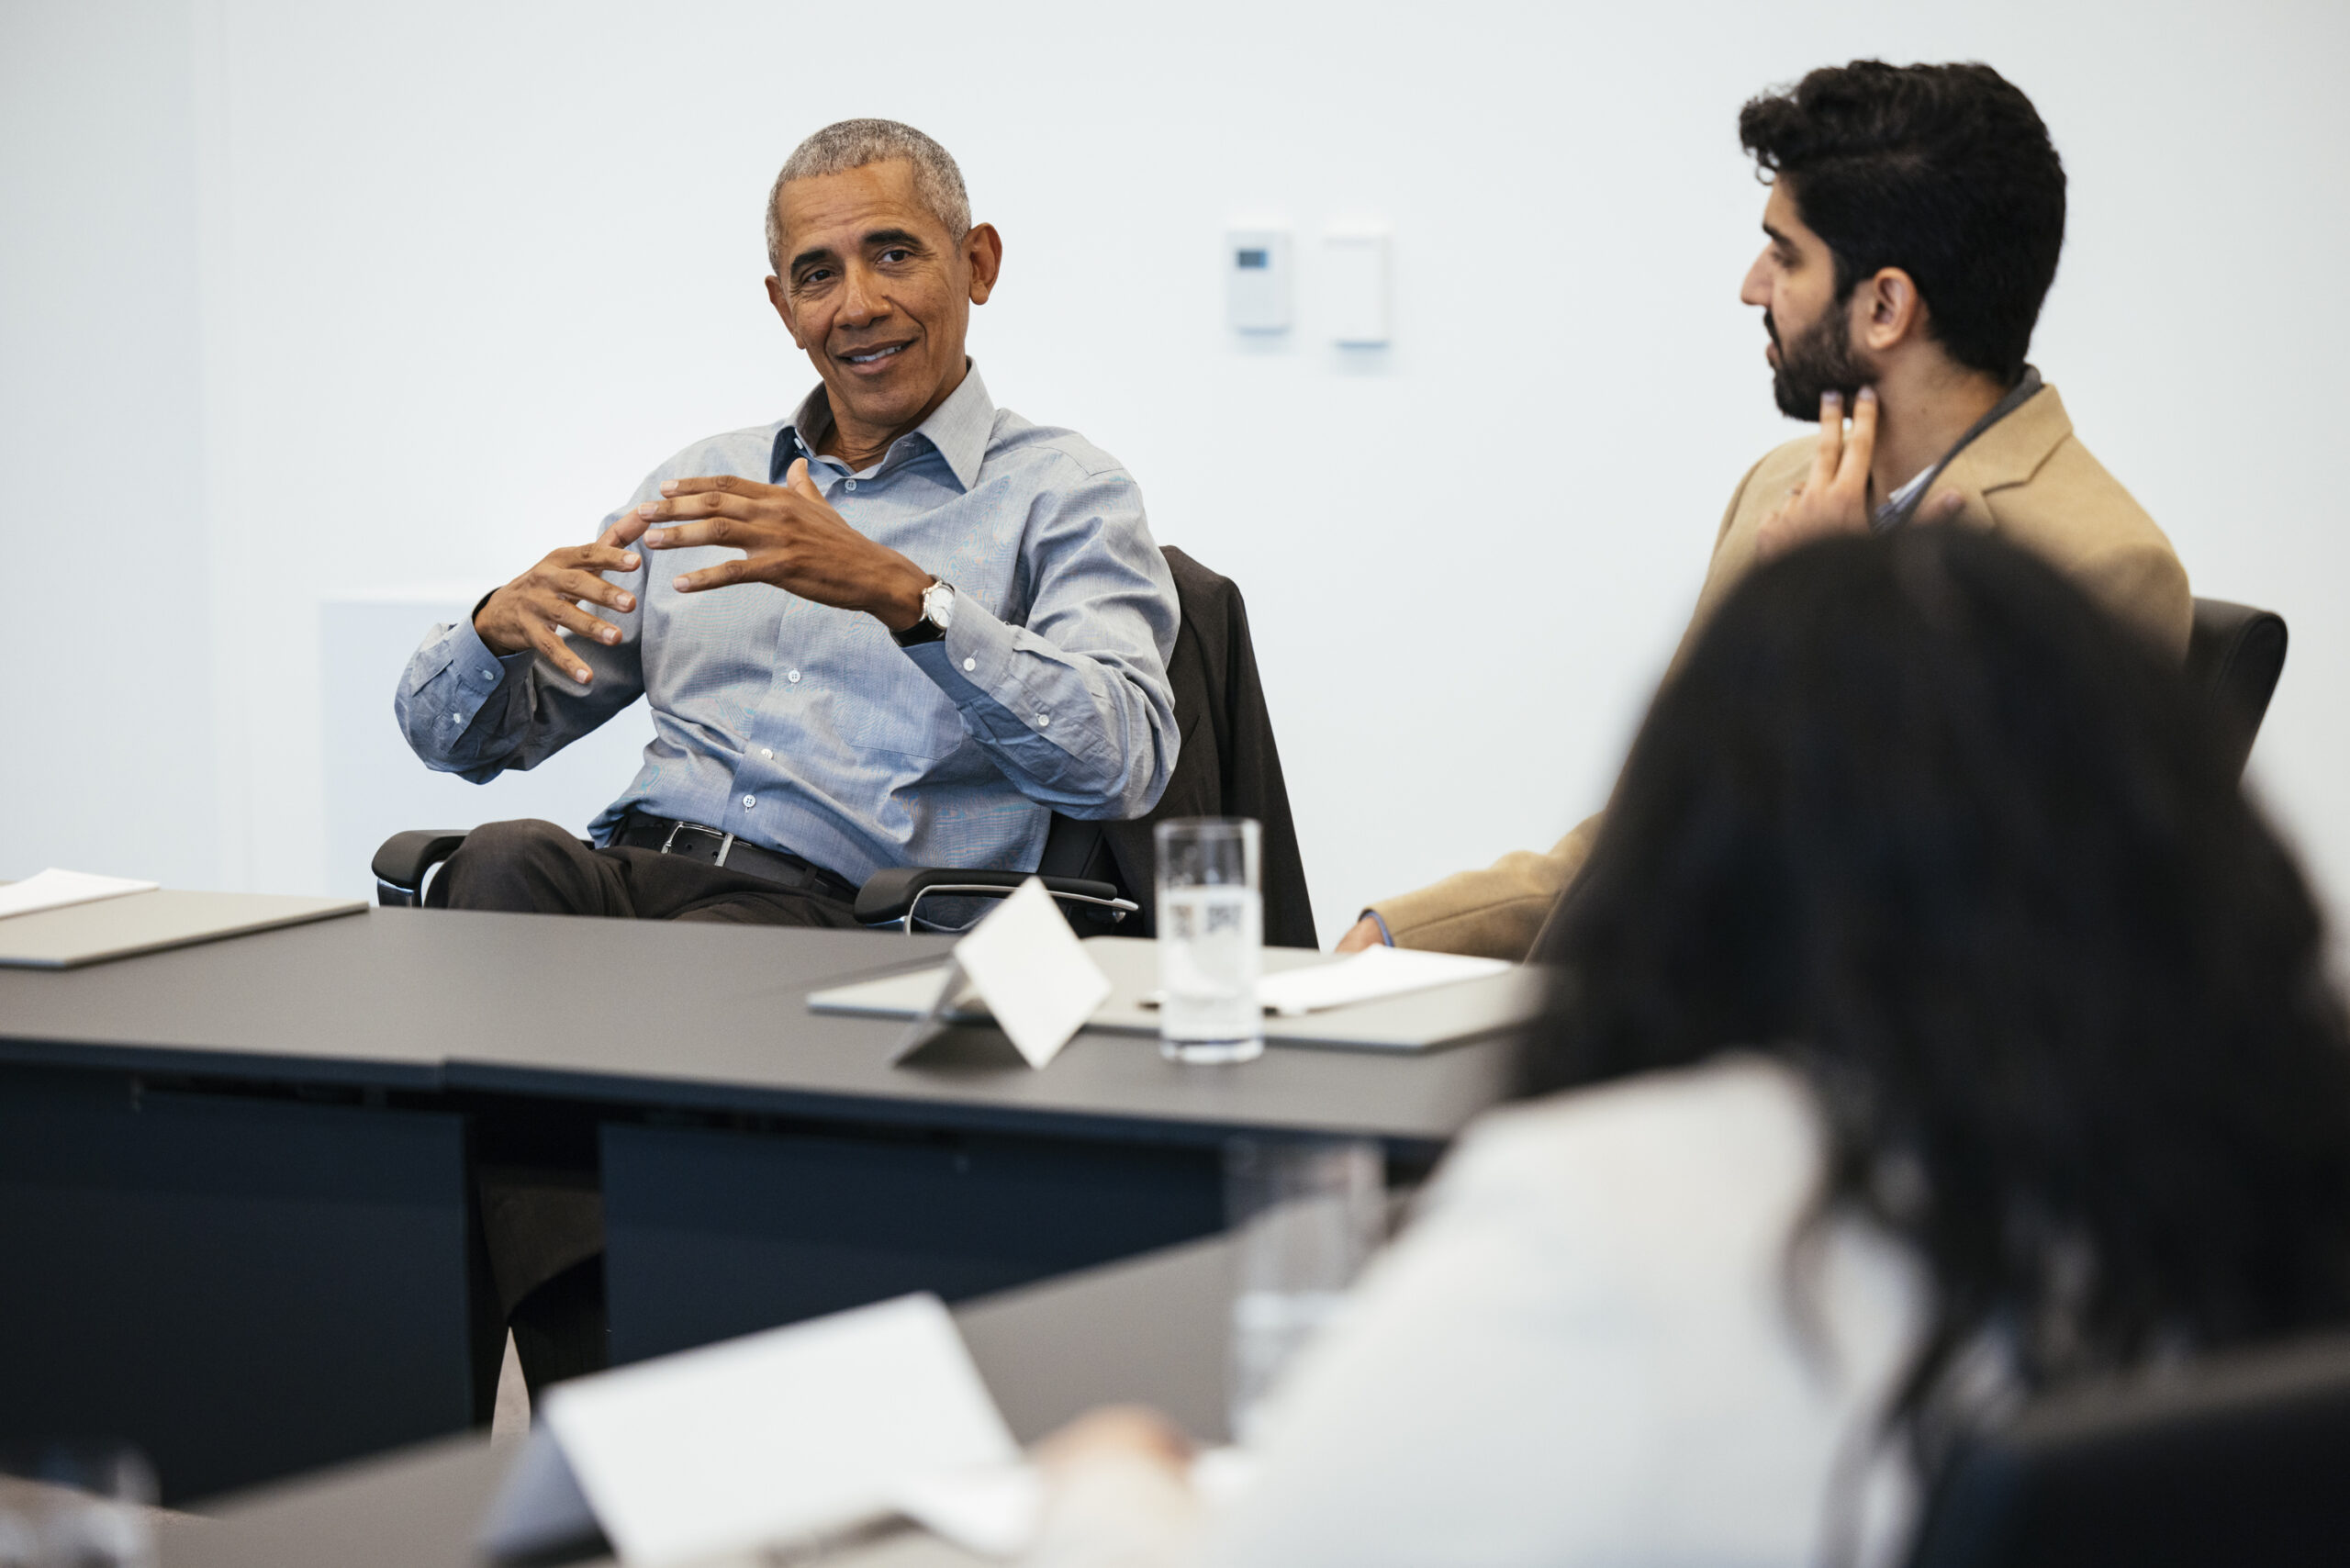 Two Obama Scholars dressed in business casual attire listen attentively President Obama at a table during a roundtable meeting. President Obama gestures with his hands open while speaking.